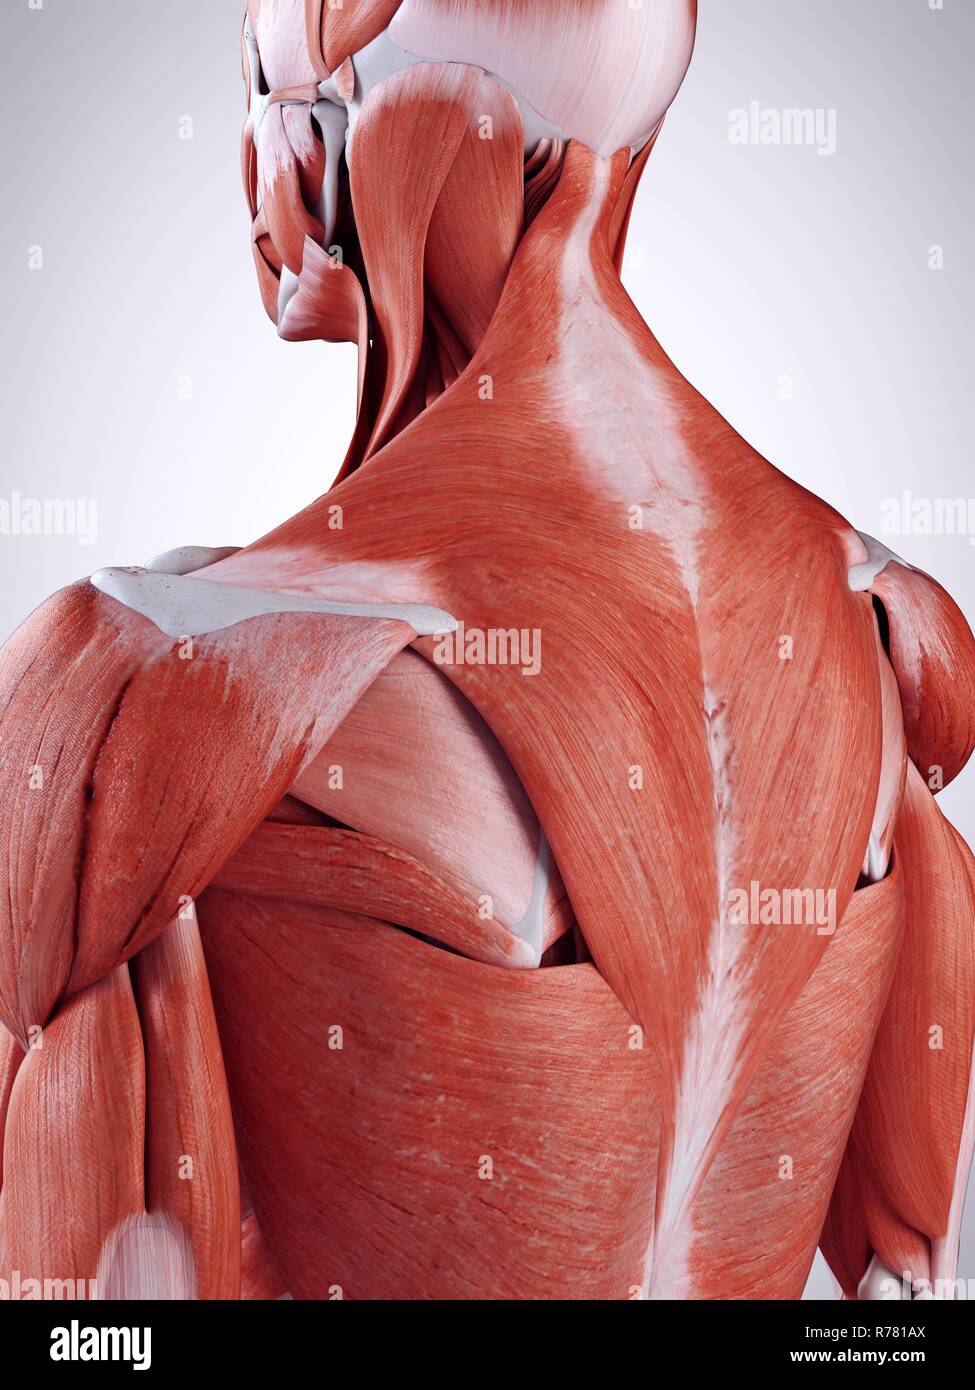 Upper Back Muscles High Resolution Stock Photography And Images Alamy